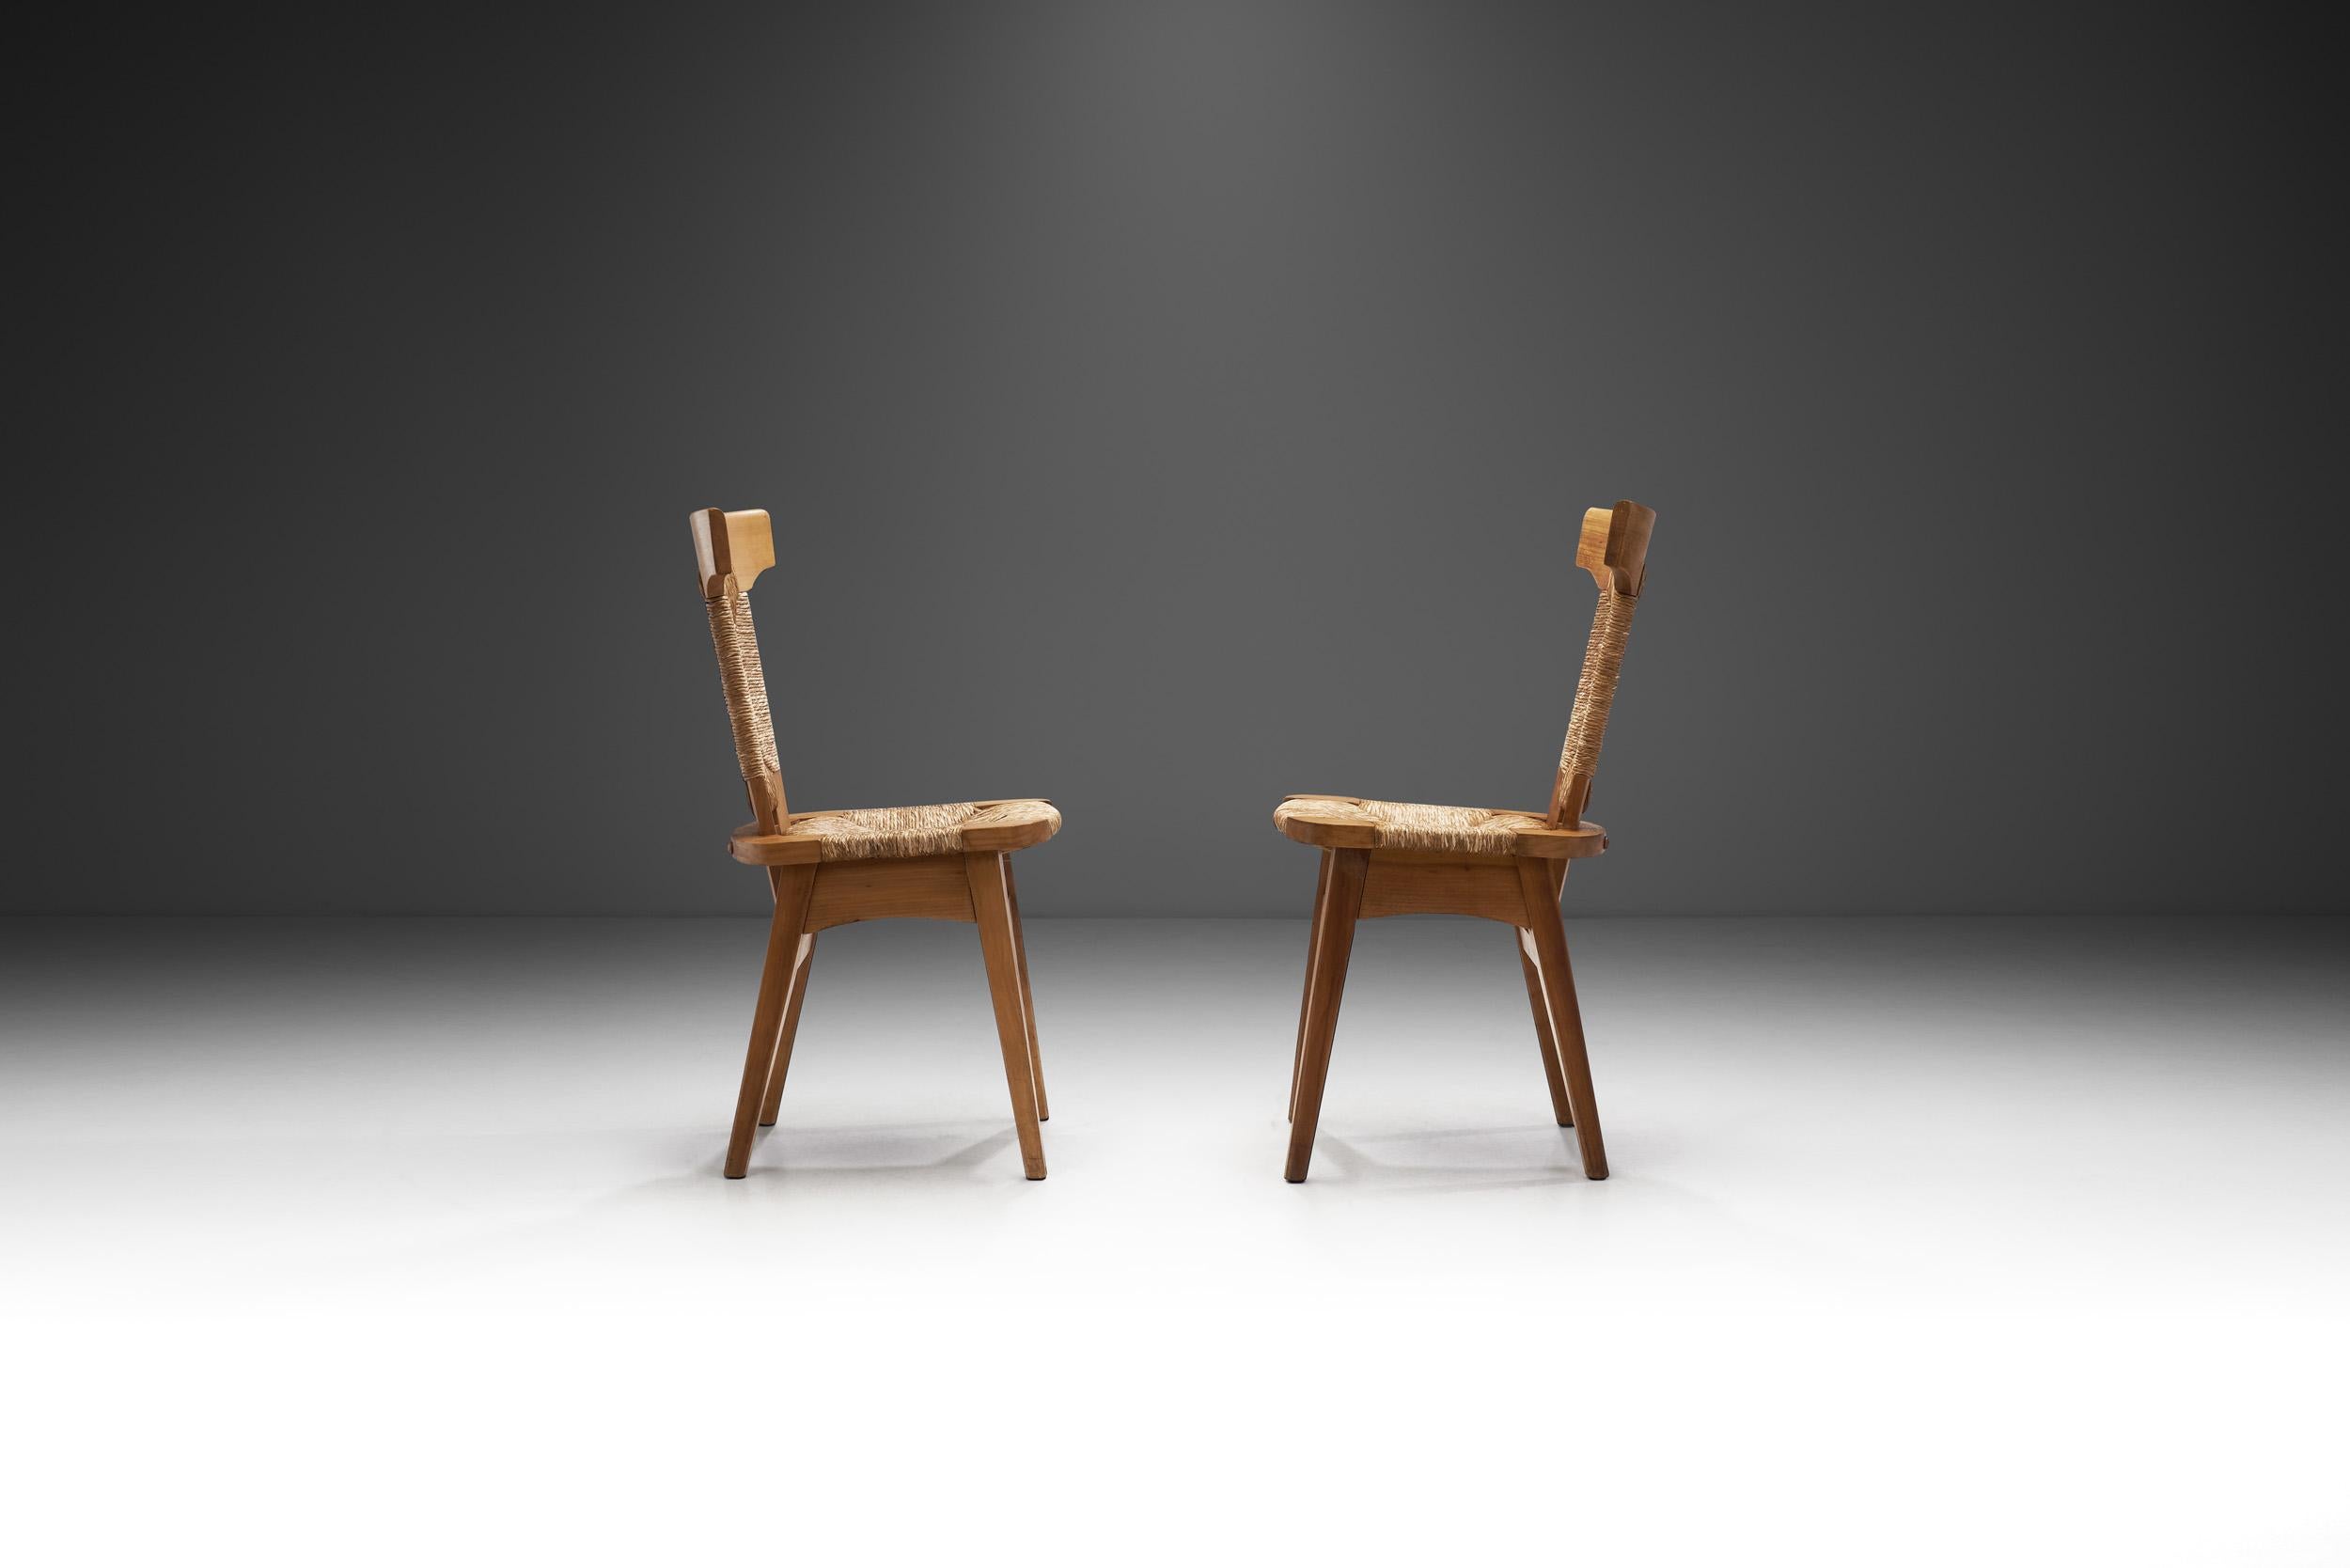 Early 20th Century Dutch Arts & Crafts Chairs by W. Kuyper, The Netherlands 1920s For Sale